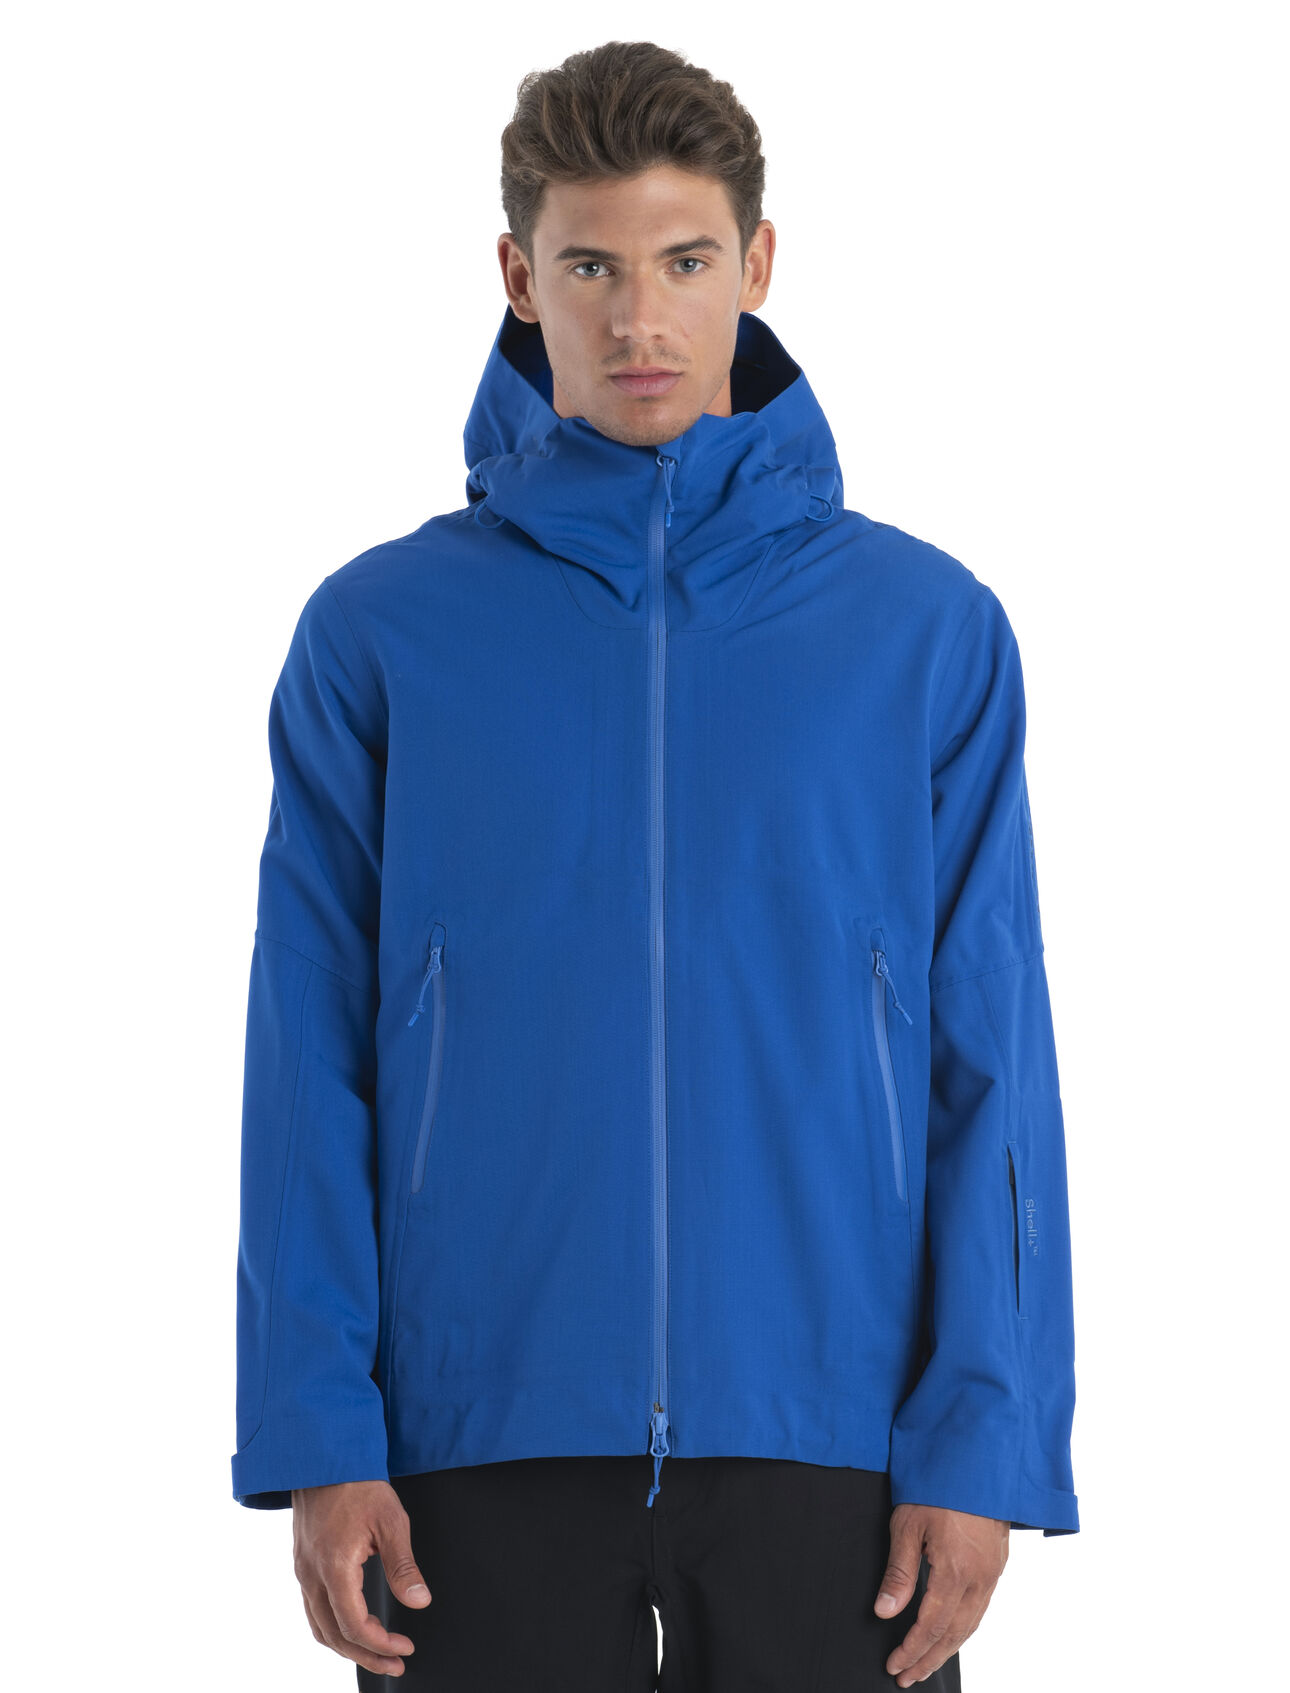 Mens Shell+™ Merino Peak Hooded Jacket An innovative technical shell made with 100% merino wool, the Shell+™ Peak Hooded Jacket provides ample protection and freedom of movement during any snowy winter adventure.